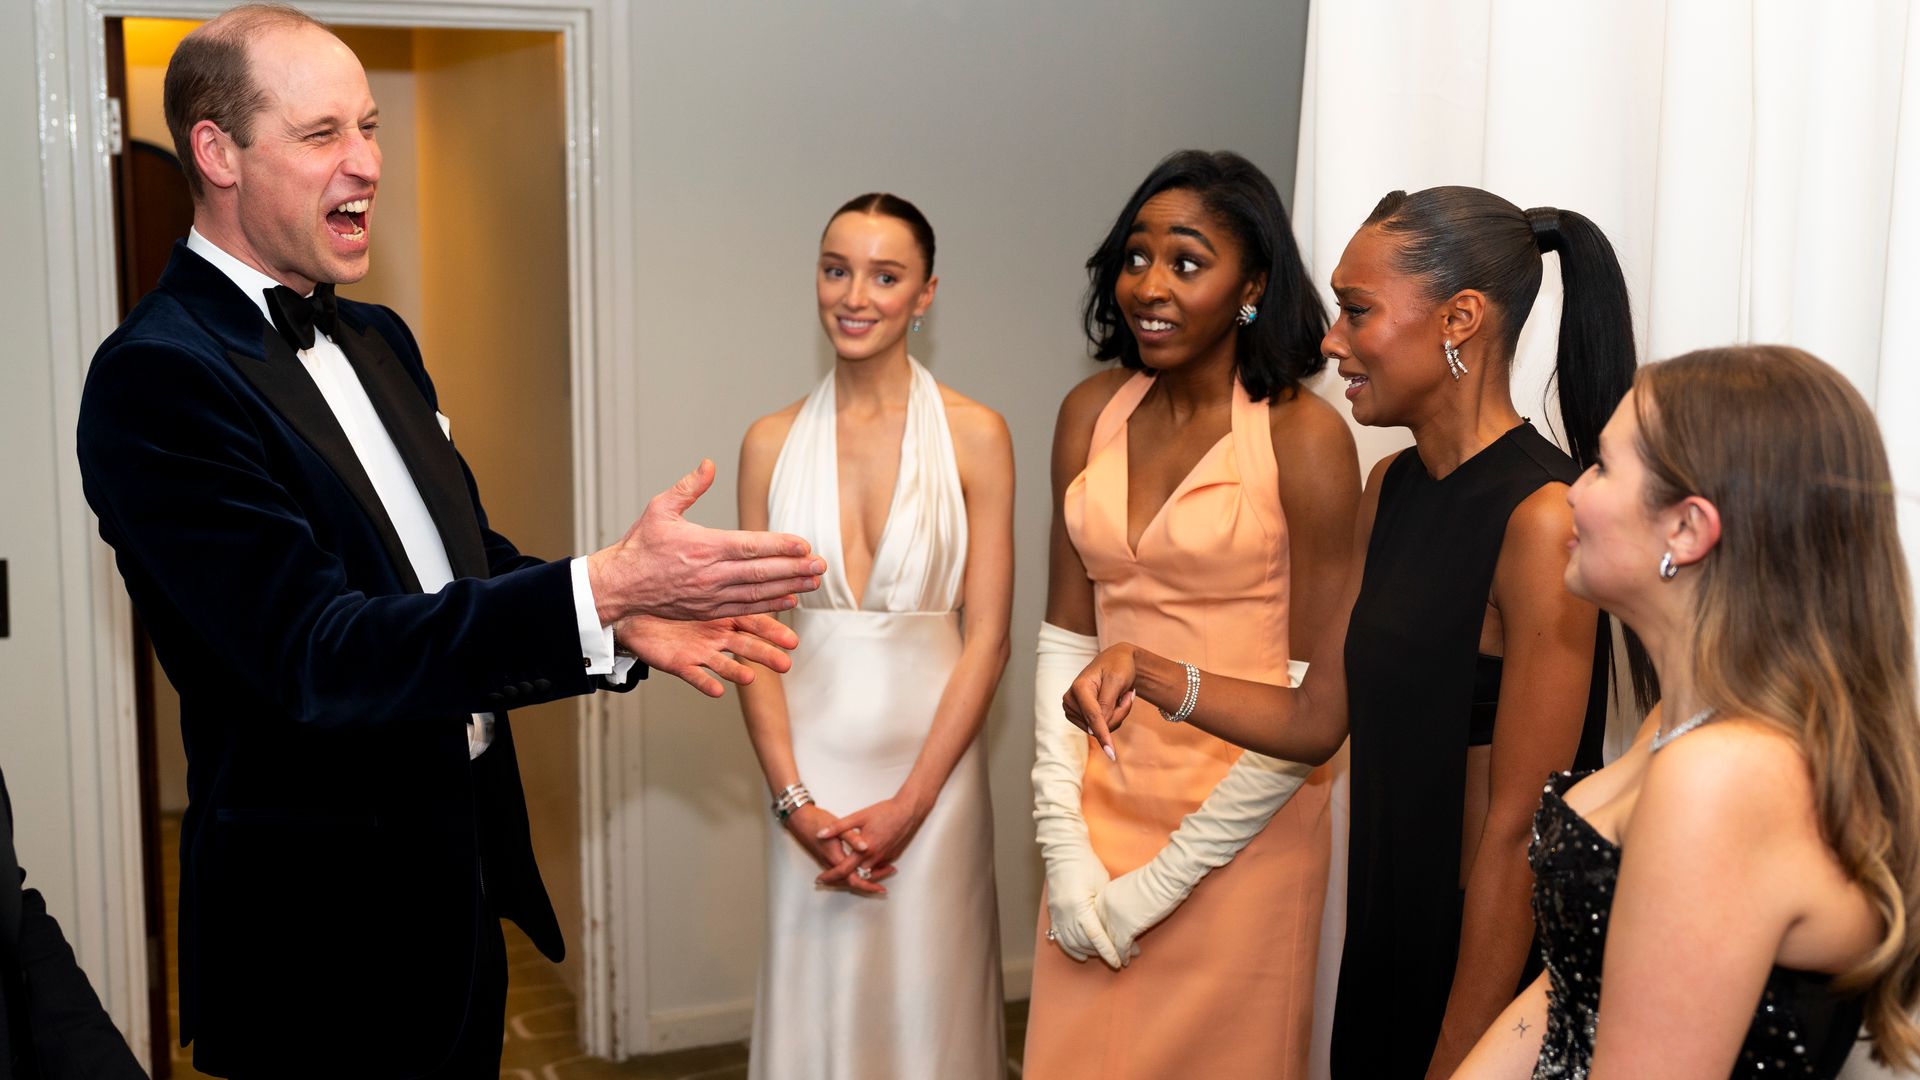 Prince William, Prince of Wales, president of Bafta meets  EE Rising Stars Phoebe Dynevor, Ayo Edebiri, Sophie Wilde and Mia McKenna Bruce  after the Bafta Film Awards 2024 at the Royal Festival Hall